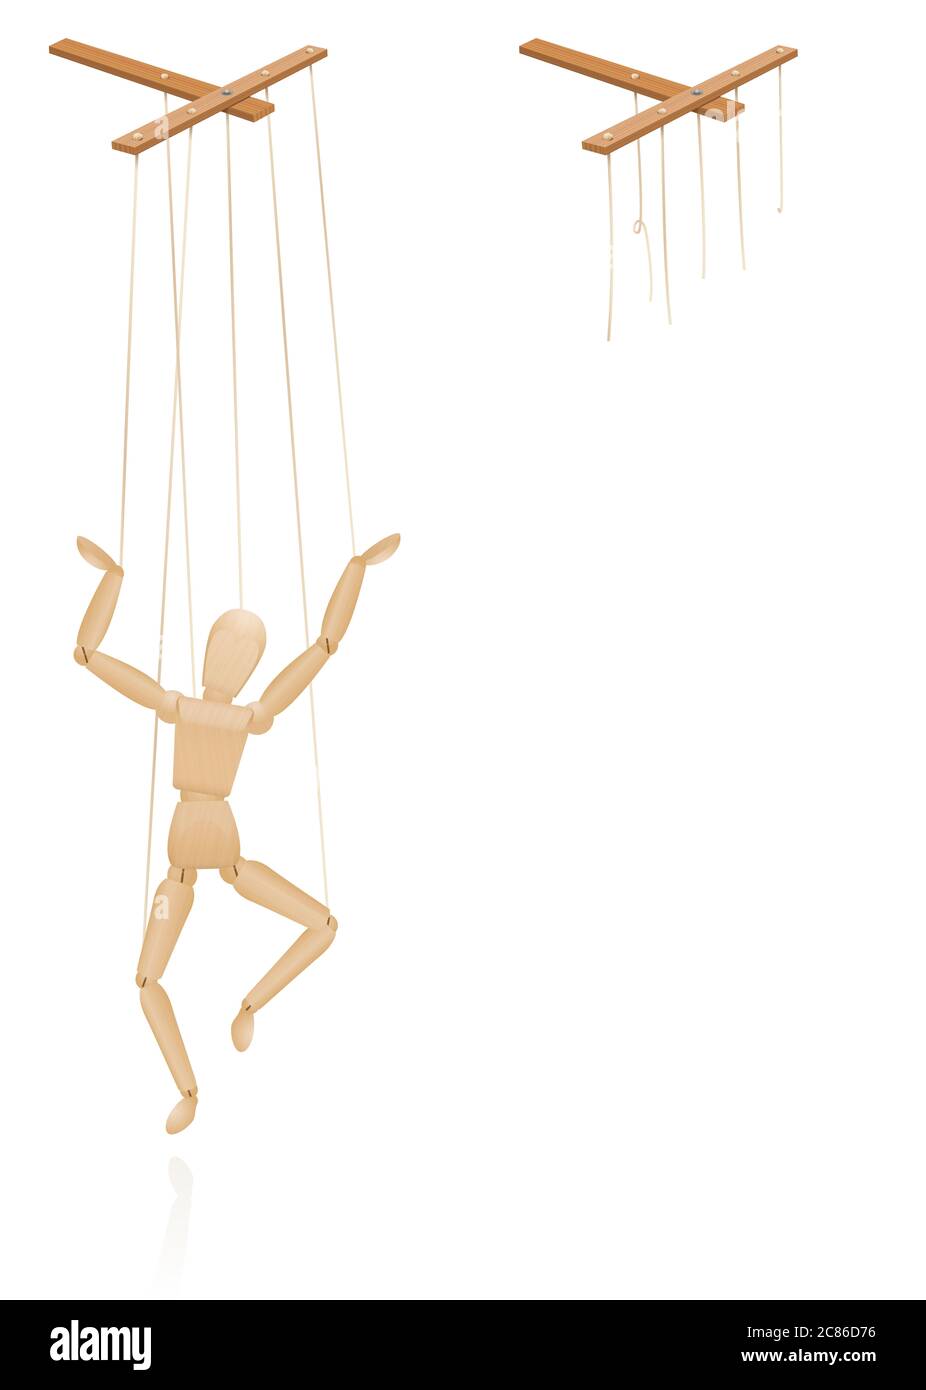 Puppet on strings. Marionette control bar with intact and broken strings. Torn cords as a symbol for freedom, independence, autonomy, liberty. Stock Photo